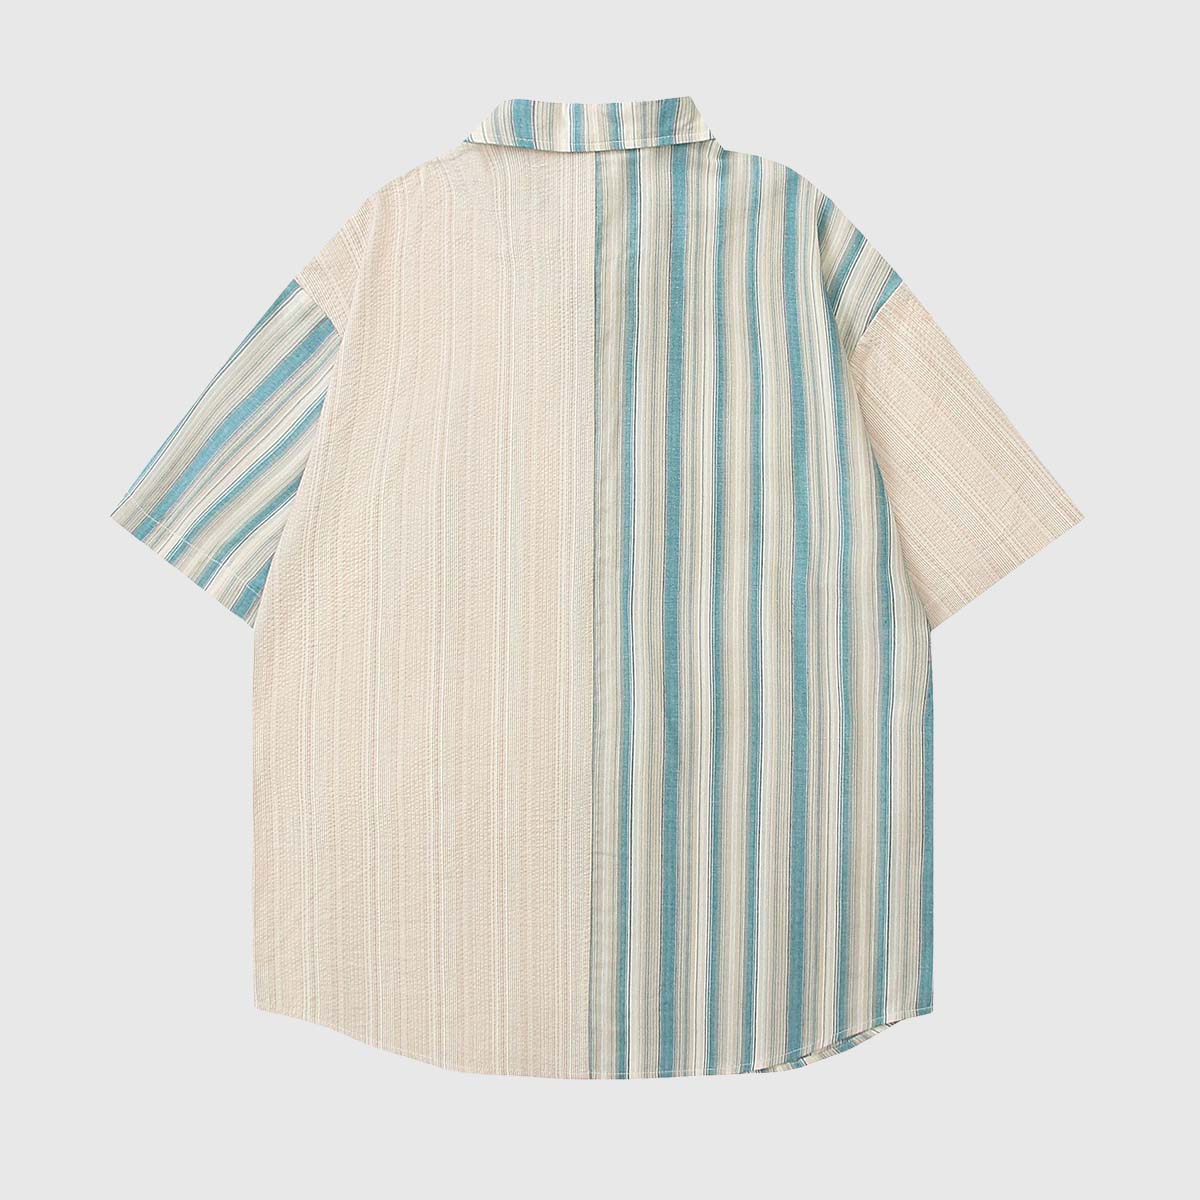 Vintage Striped Embroidered Shirt